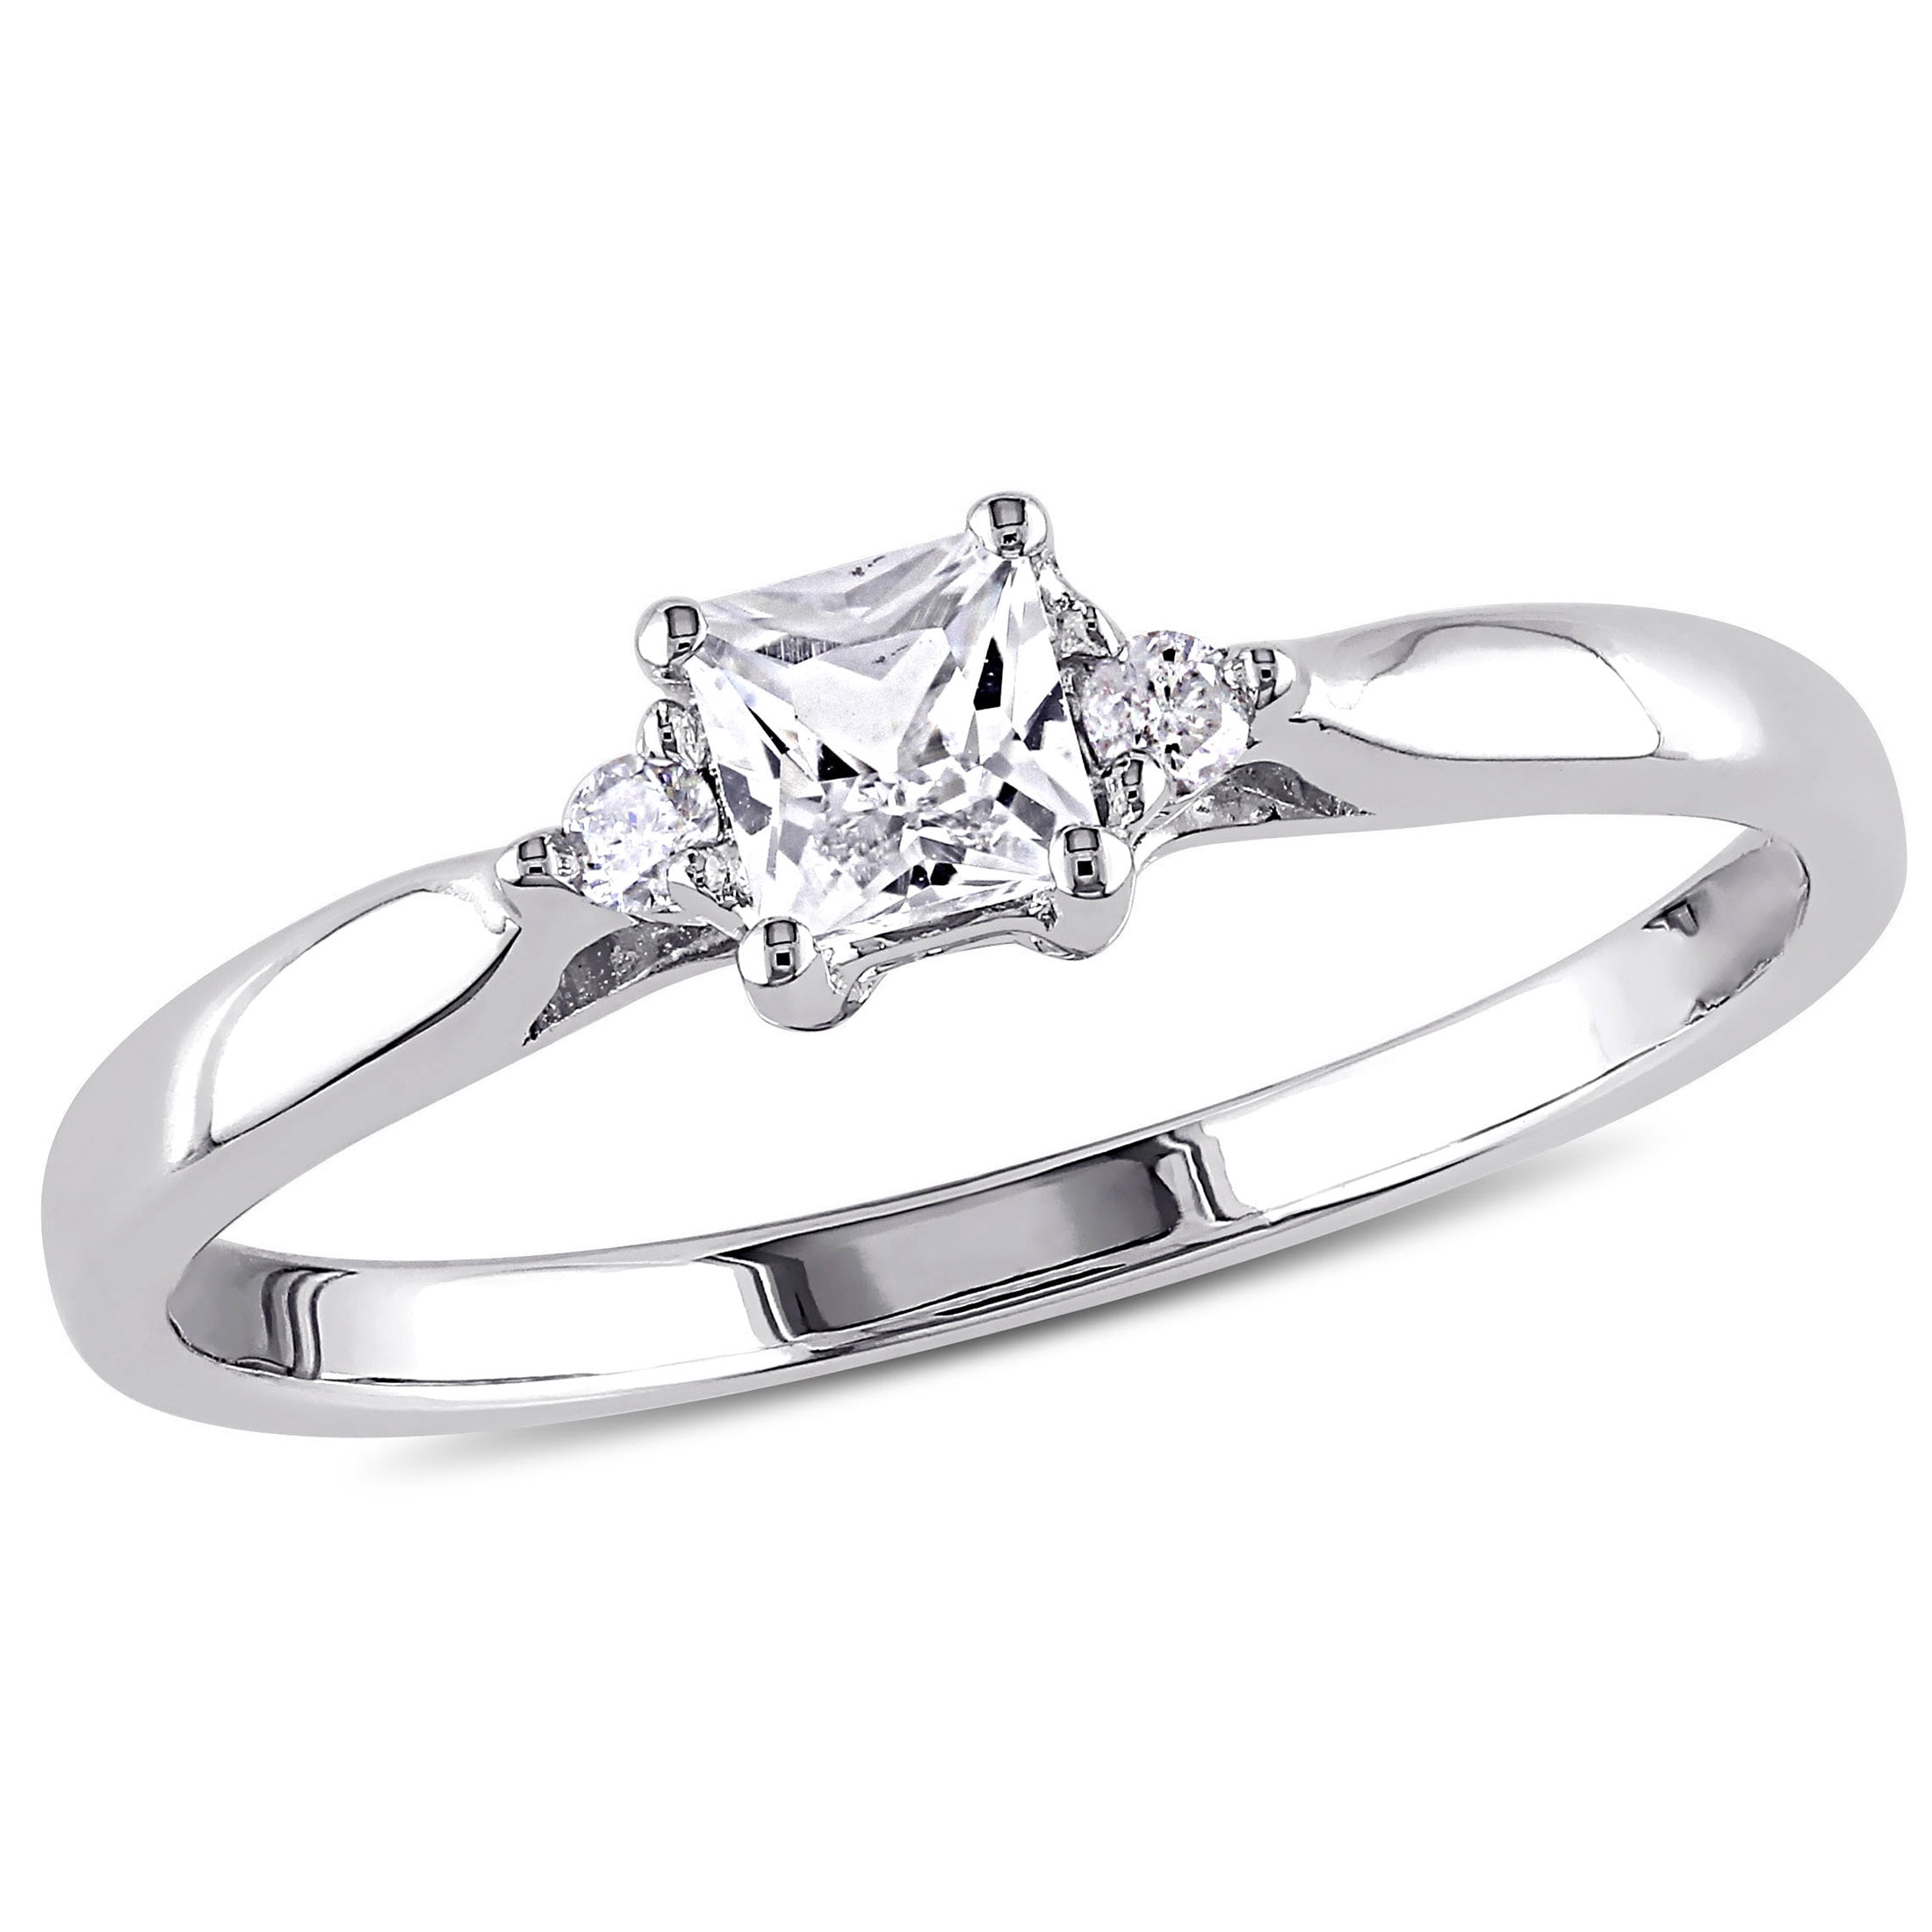 Size-4.5 KATARINA Diamond Accent Fashion Ring in Sterling Silver G-H, I2-I3 44004416_0450_V